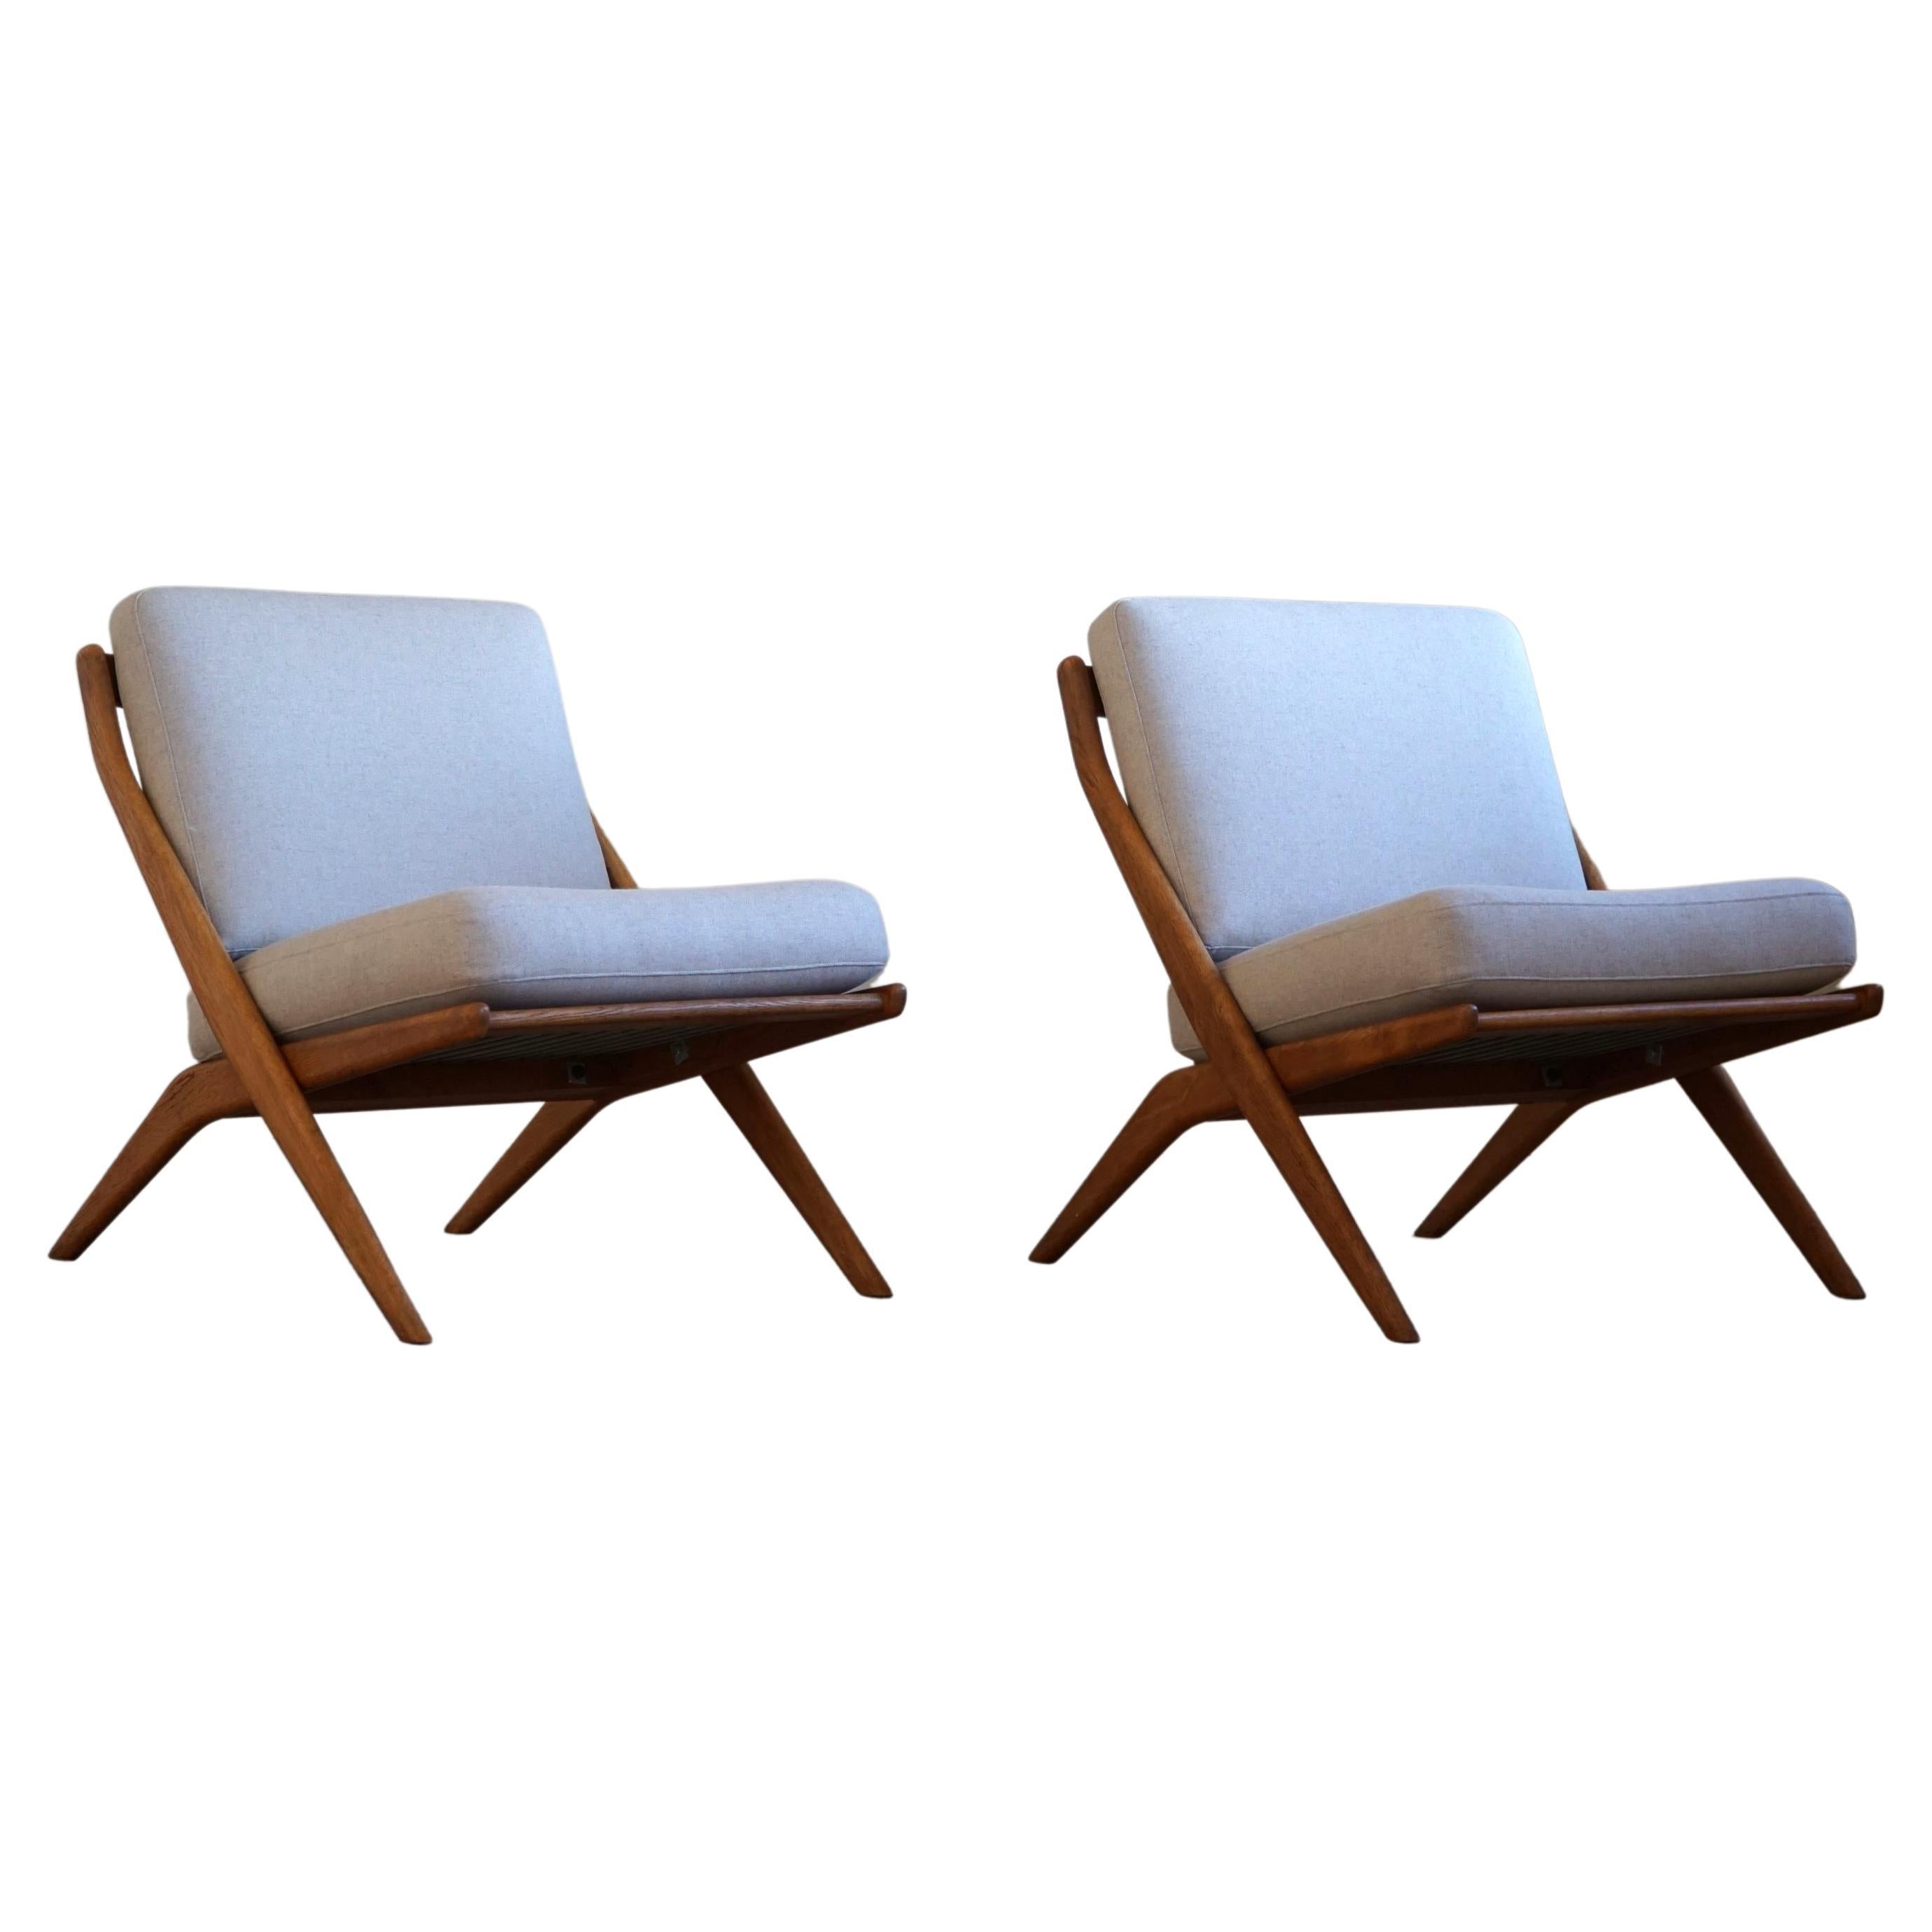 Folke Ohlsson. Pair of Lounge chairs, Model "Frisco/5-156", Bodafors, 1960s For Sale